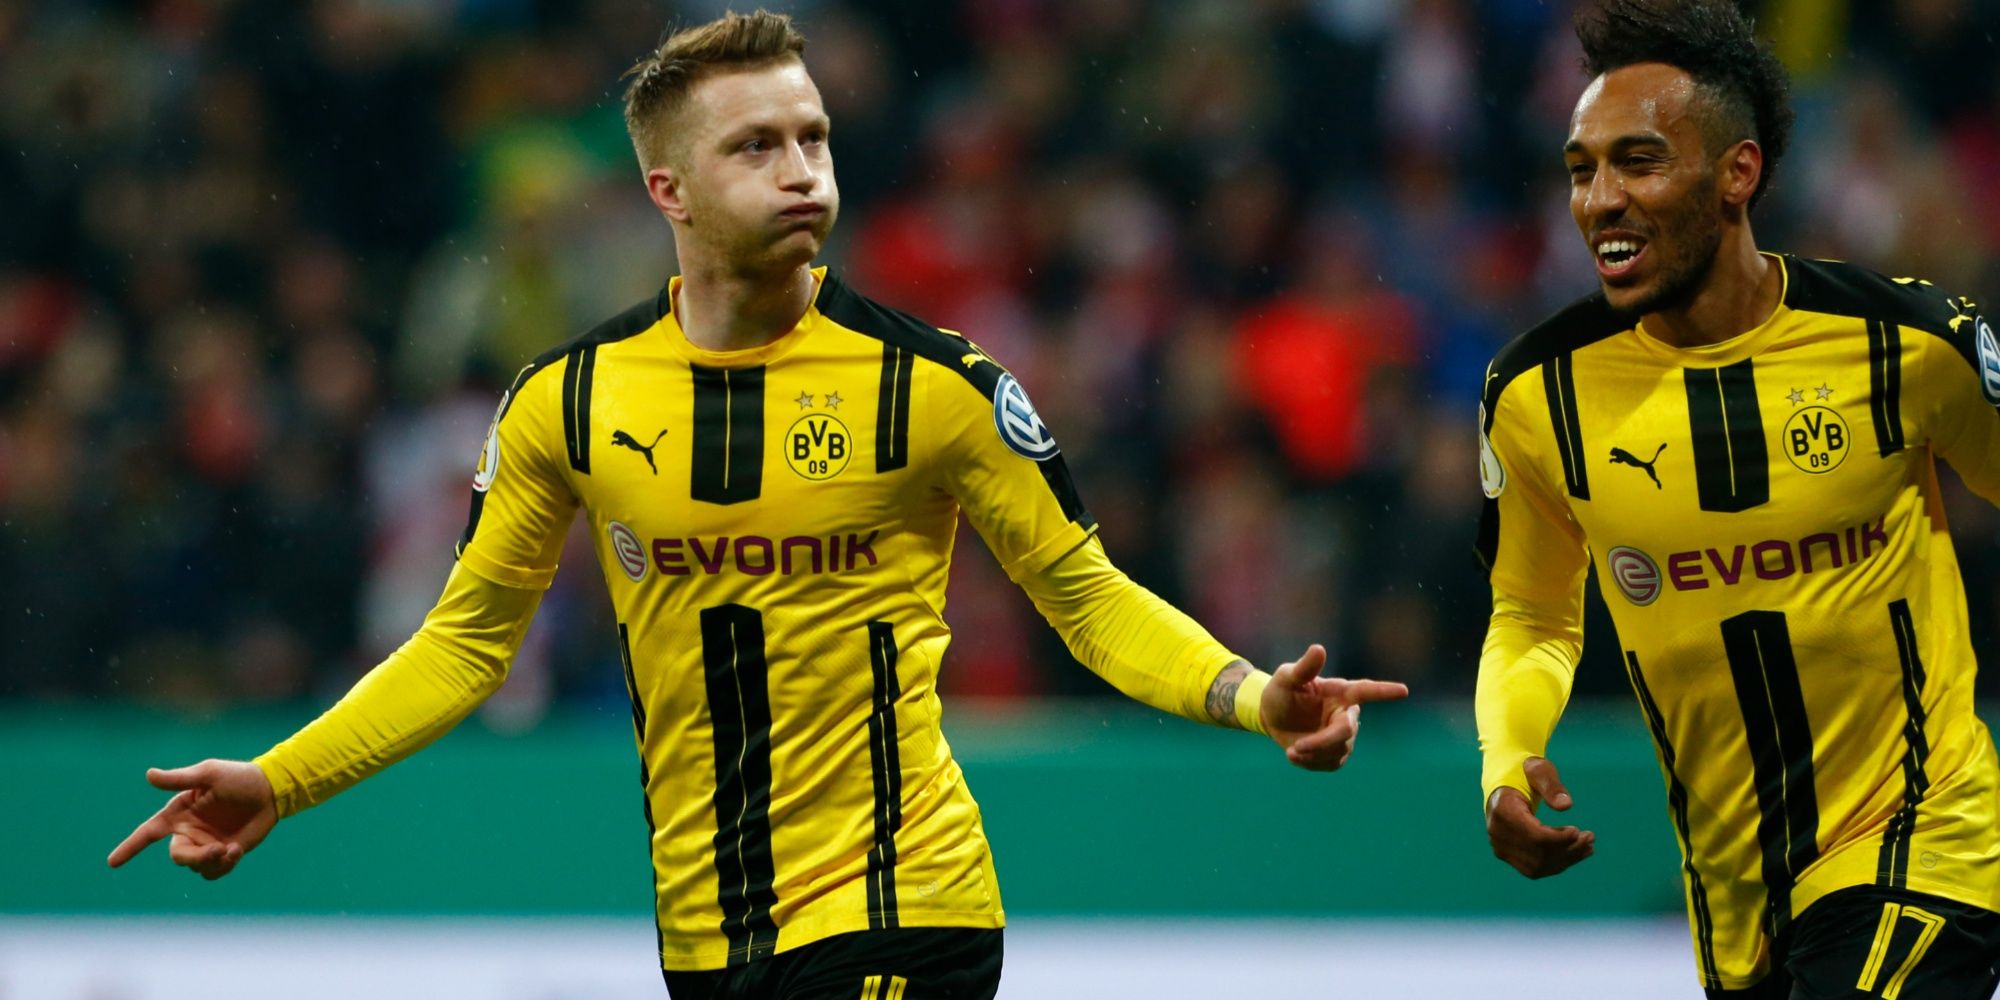 Aubameyang and Reus formed a deadly duo.